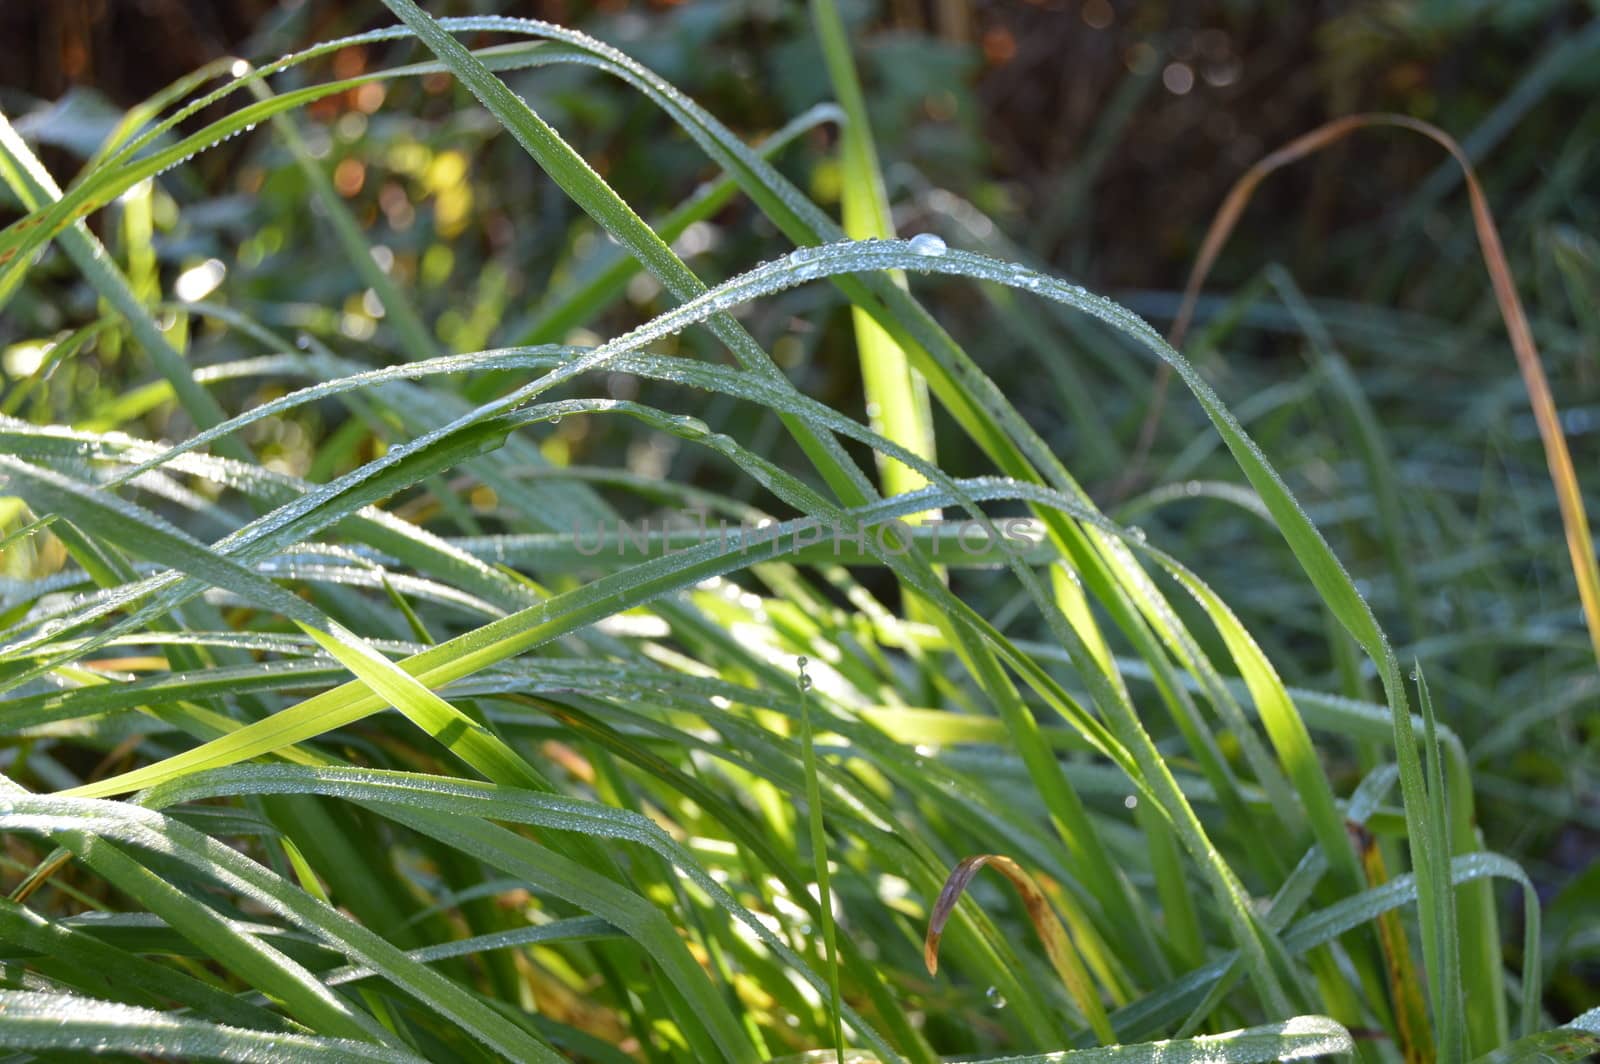 Straw with morning dew in the sun by Meretemy@hotmail.com